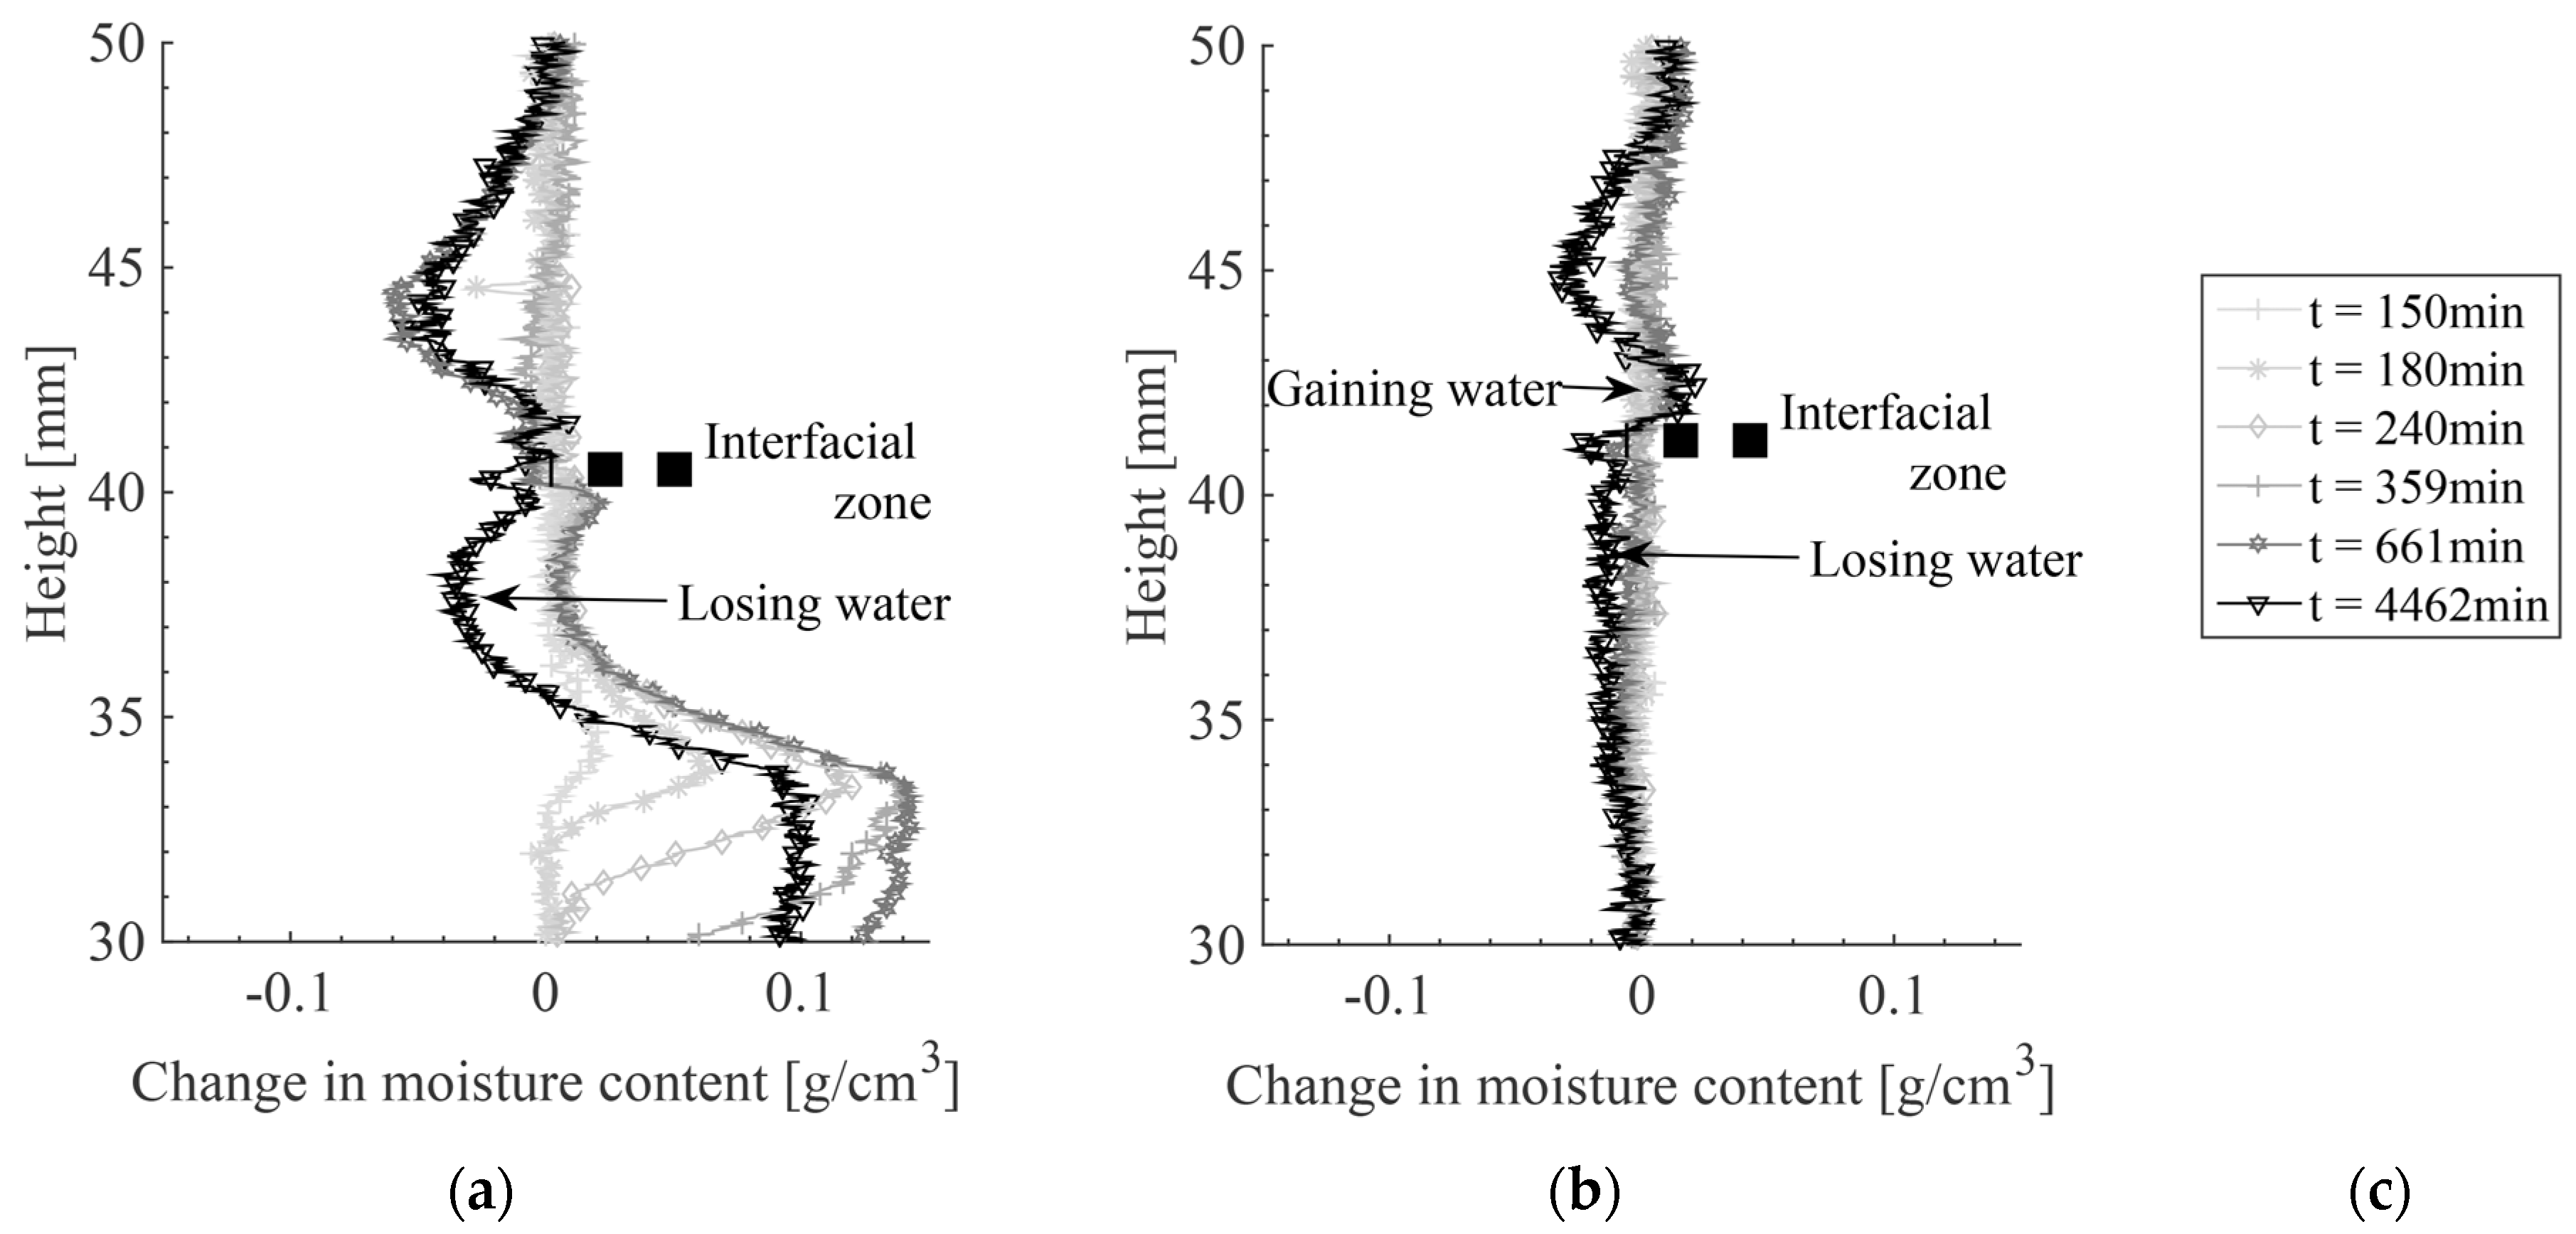 Materials Free Full Text Effect Of Moisture Exchange On Interface Formation In The Repair System Studied By X Ray Absorption Html